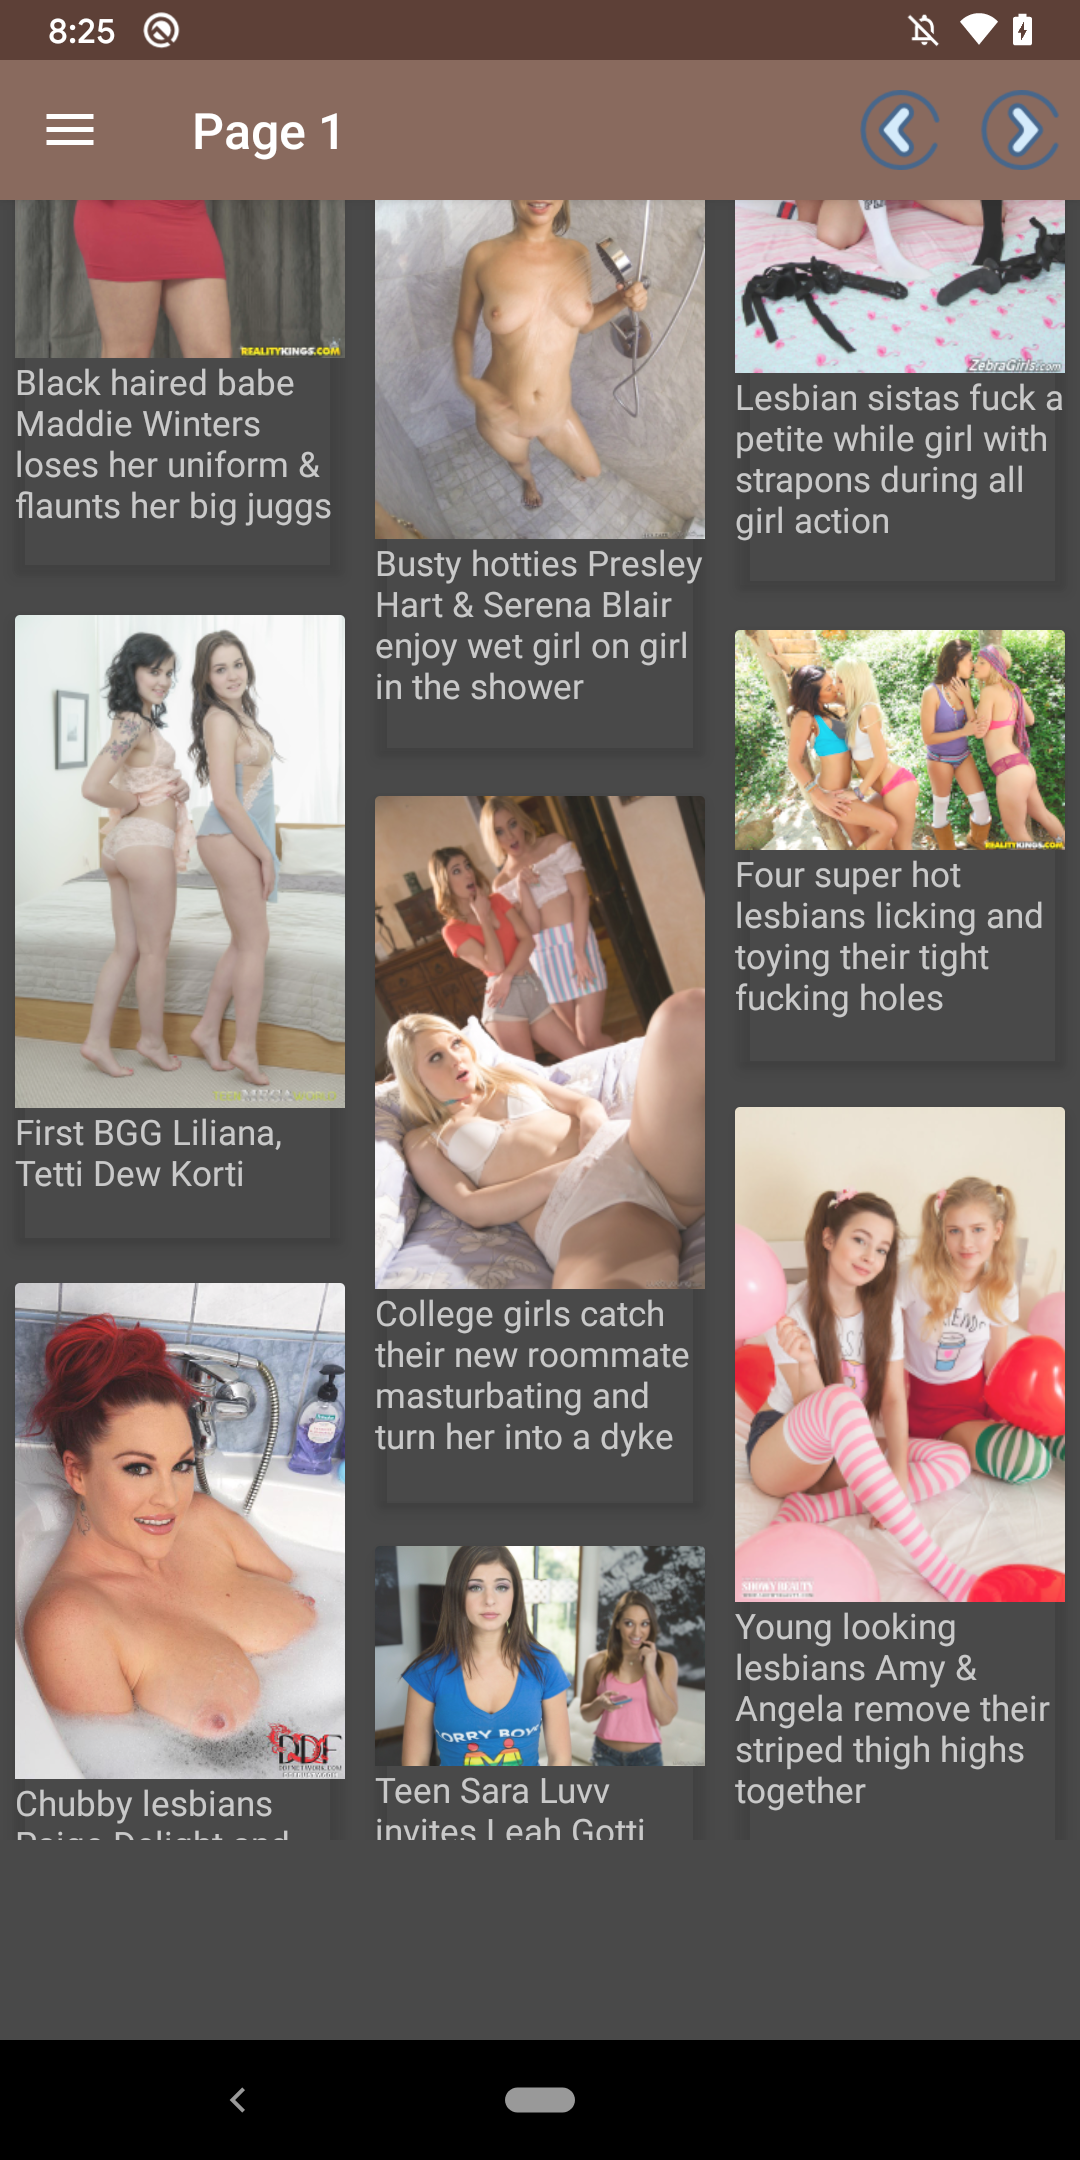 Lesbian Collections porn,hentai,galleries,pic,photo,app,download,collection,hot,editor,pictures,sexy,wallpaper,image,lily,pornstars,lane,offline,apk,pornstar,adult,panties